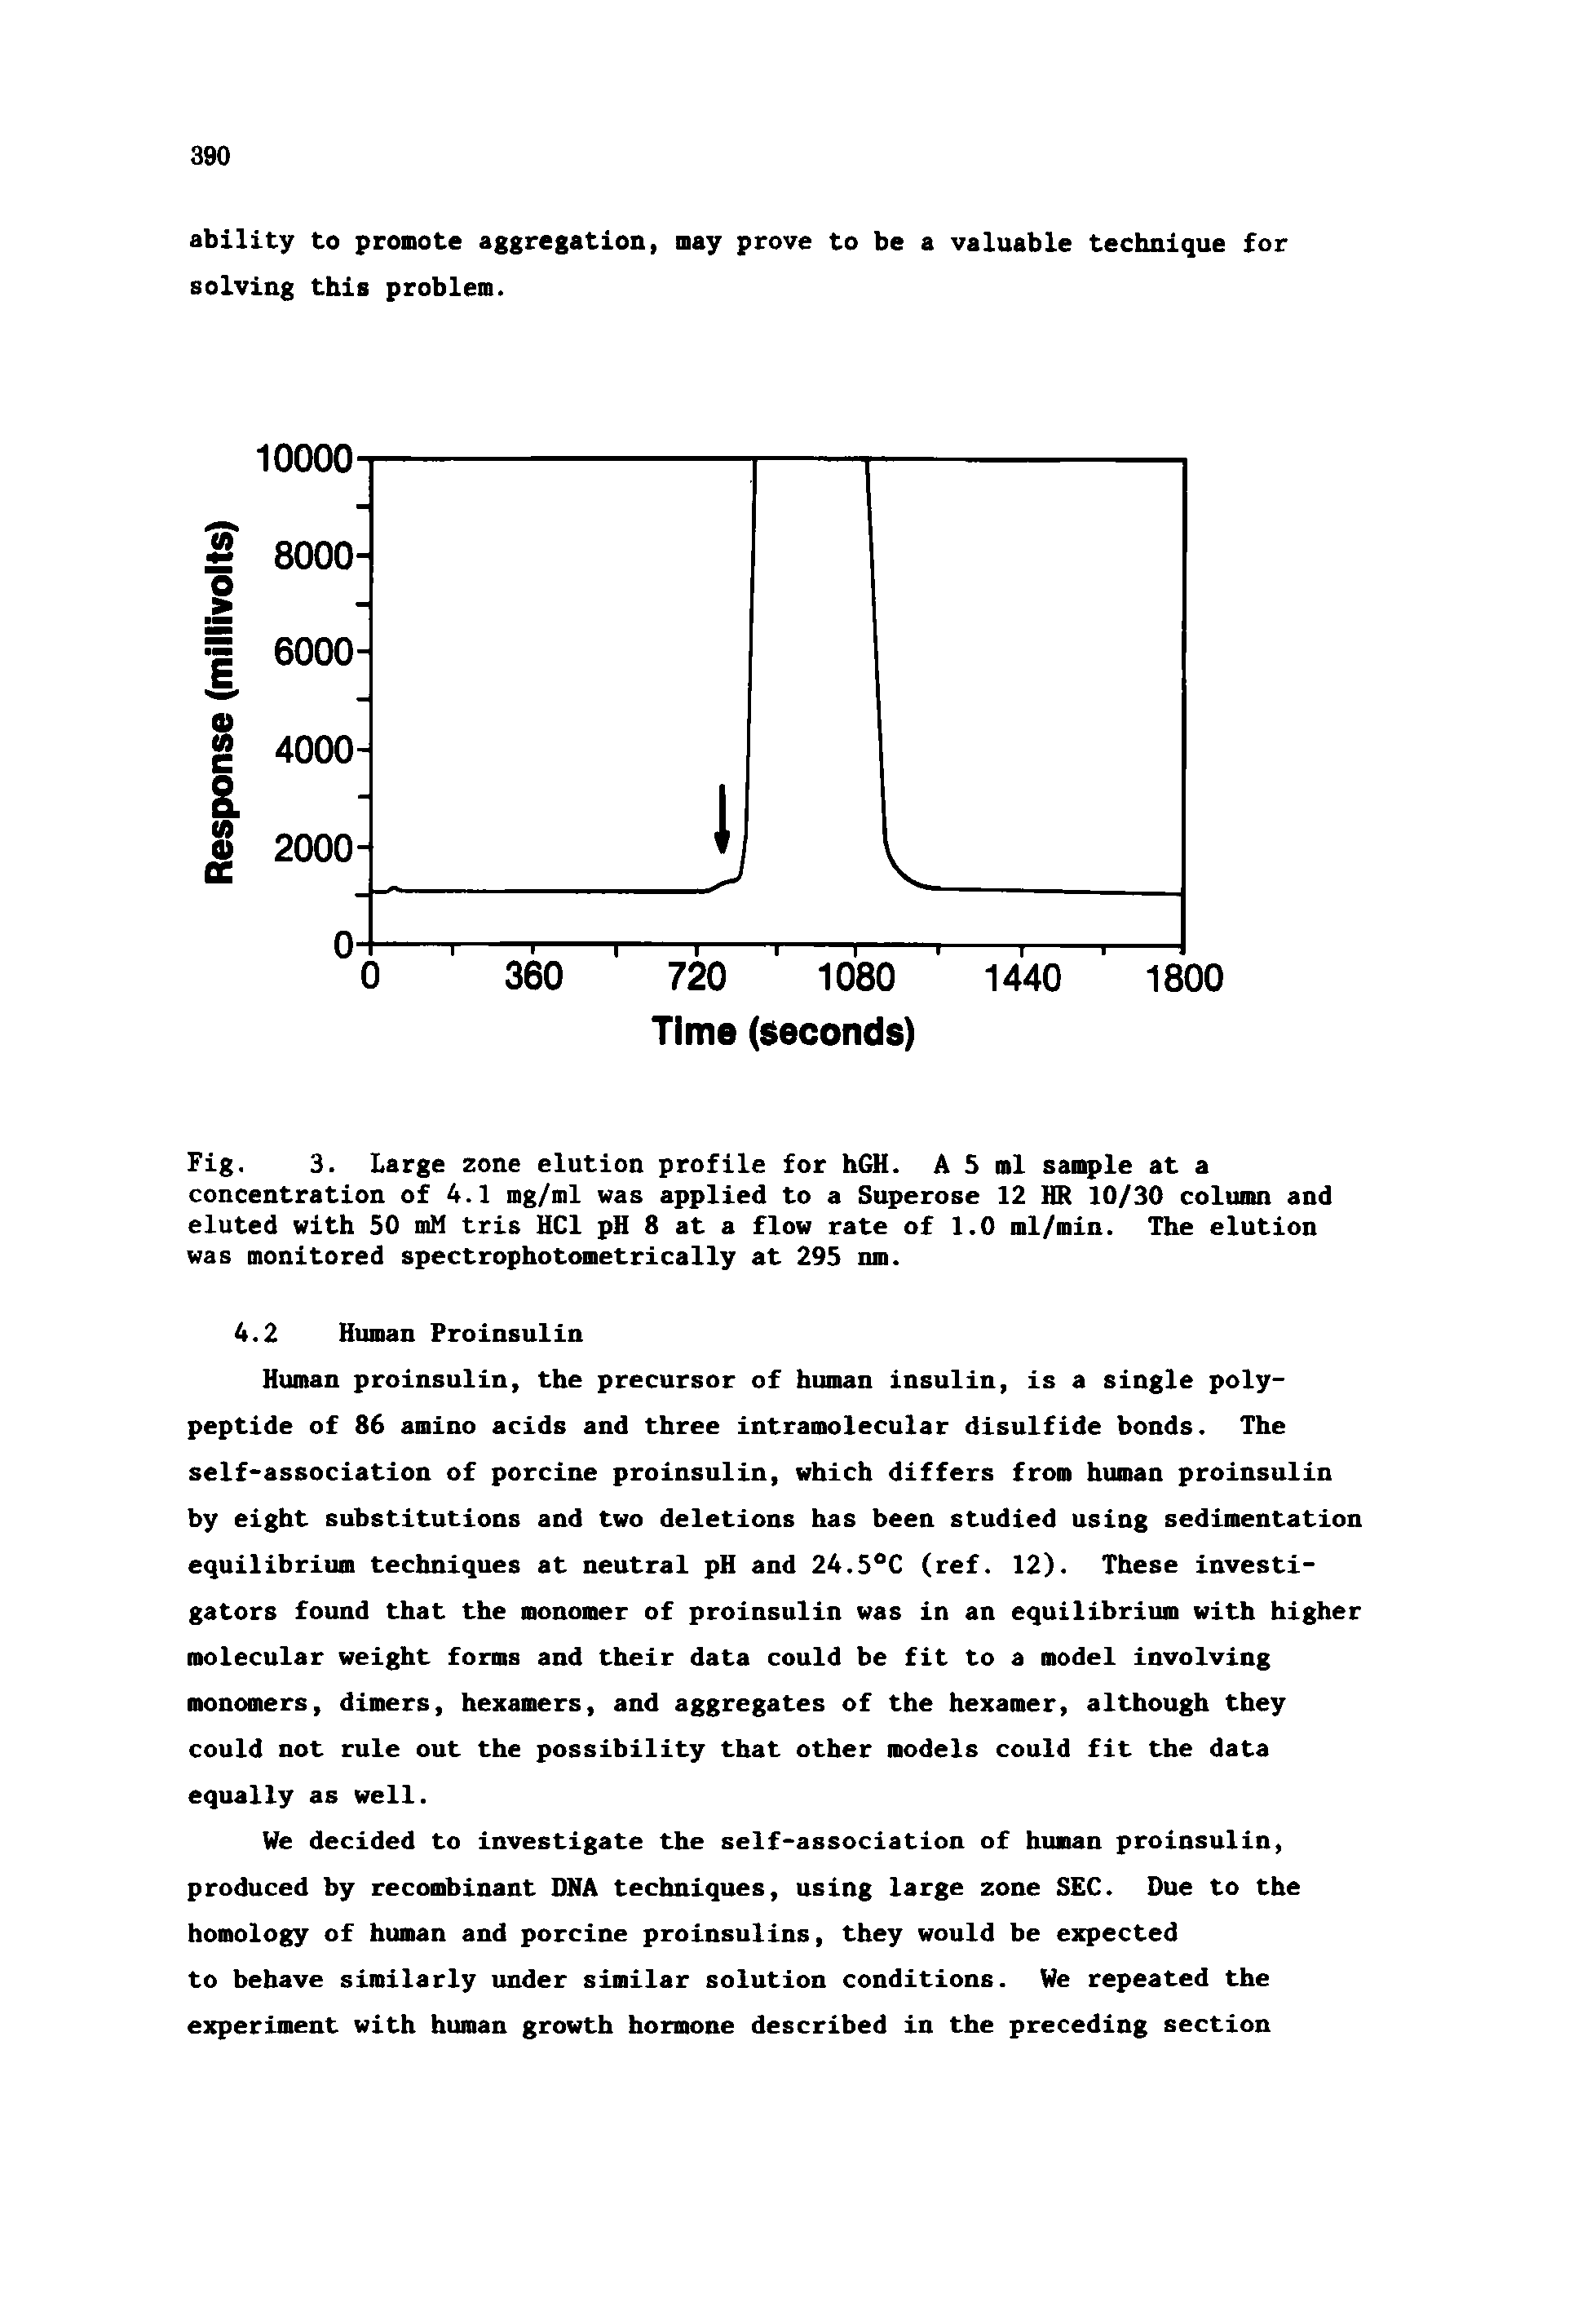 Fig. 3. Large zone elution profile for hGH. A 5 ml sample at a concentration of 4.1 mg/ml was applied to a Superose 12 HR 10/30 coluam and eluted with 50 mM trls HCl pH 8 at a flow rate of 1.0 ml/min. The elution was monitored spectrophotometrically at 295 nm.